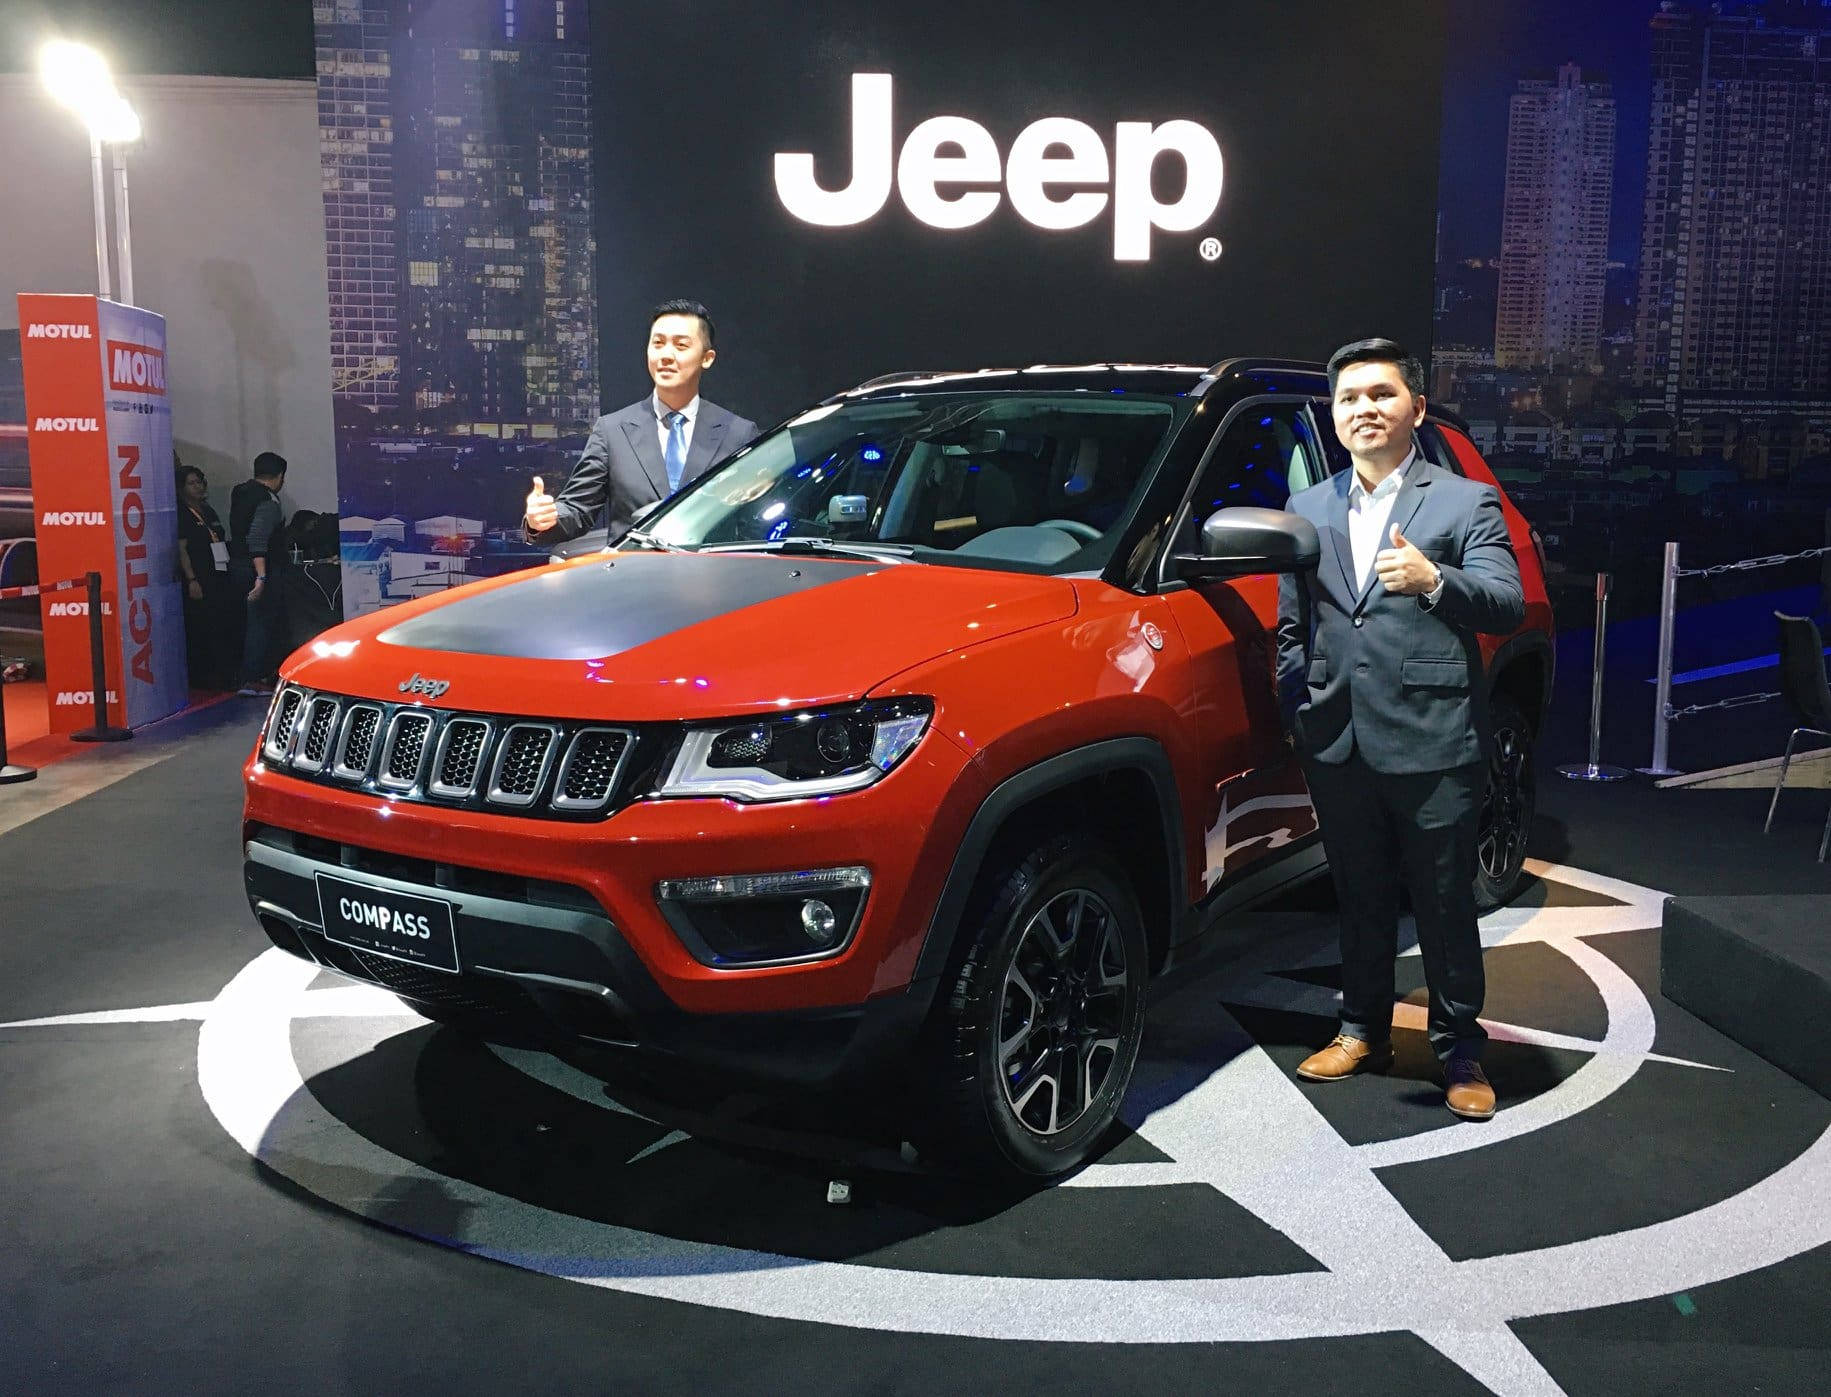 Jeep Compass Red Aesthetic With Presenters Wallpaper